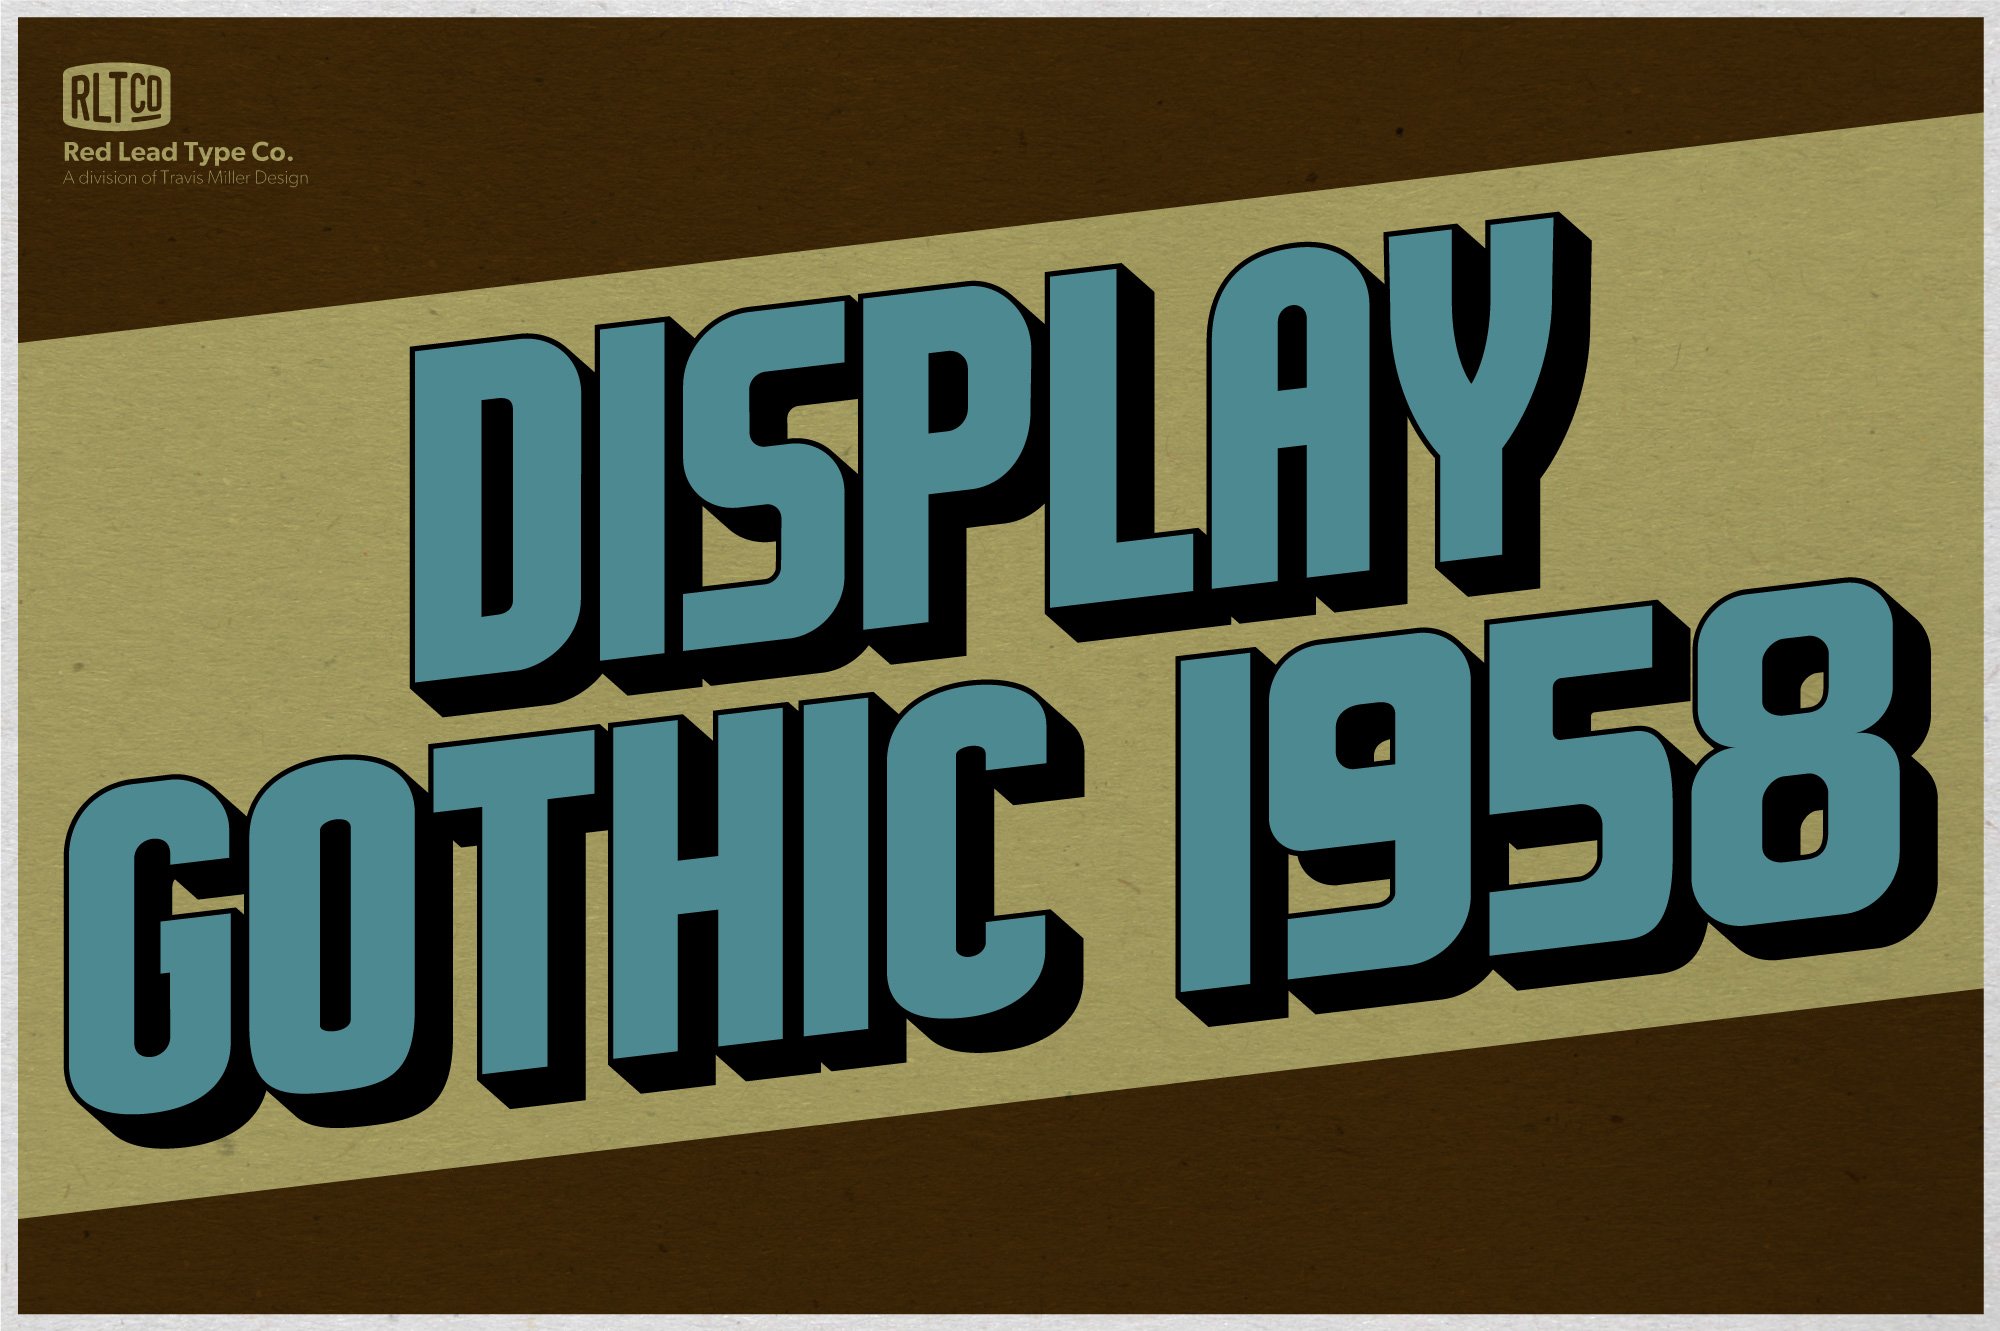 Display Gothic 1958 font cover image.